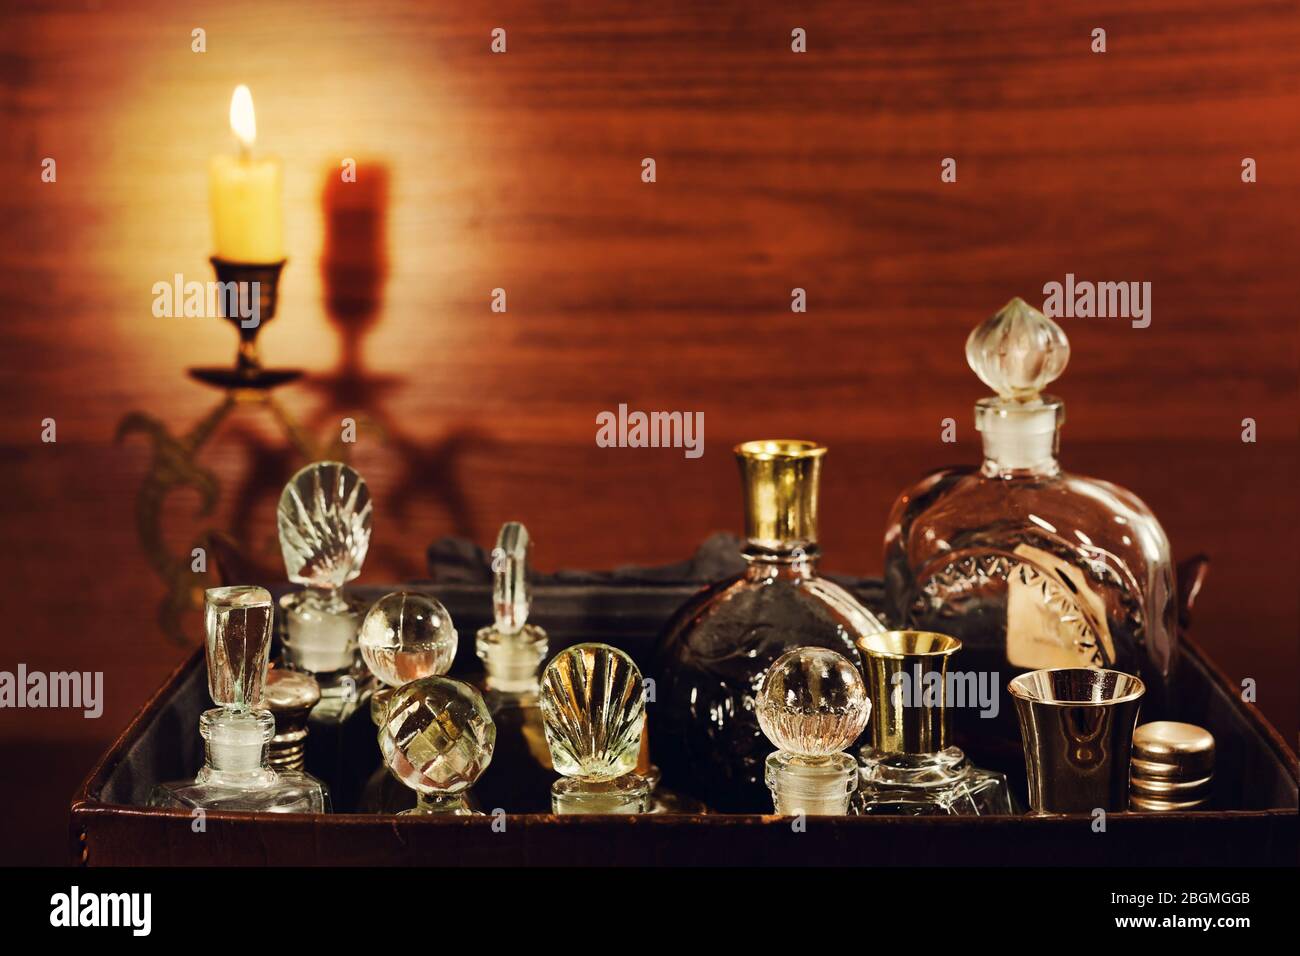 Candlelight in the bronse candlestick and various vintage perfume bottles in the old leather gripsack Stock Photo